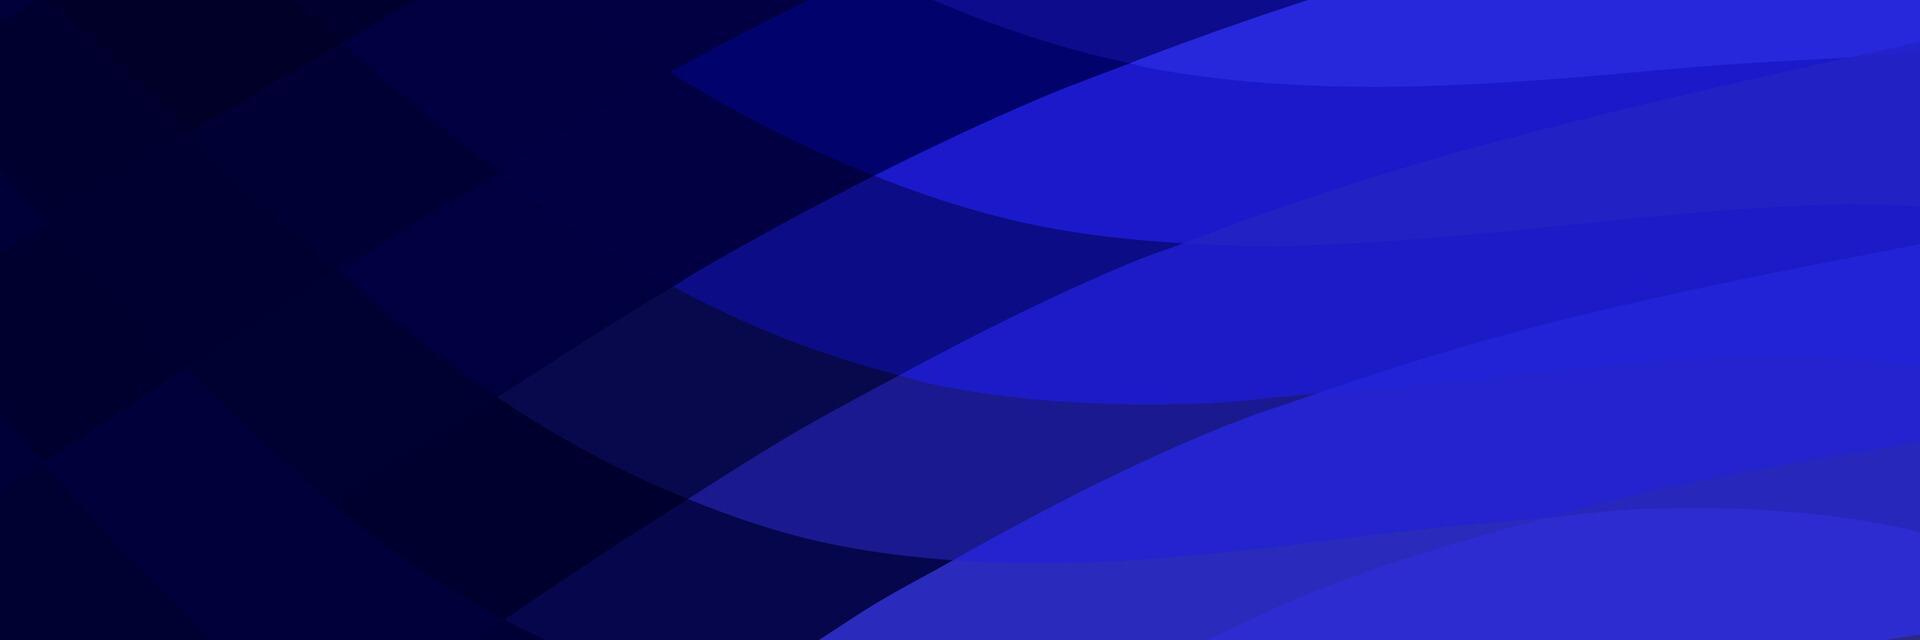 abstract elegant dark blue geometric background for business vector